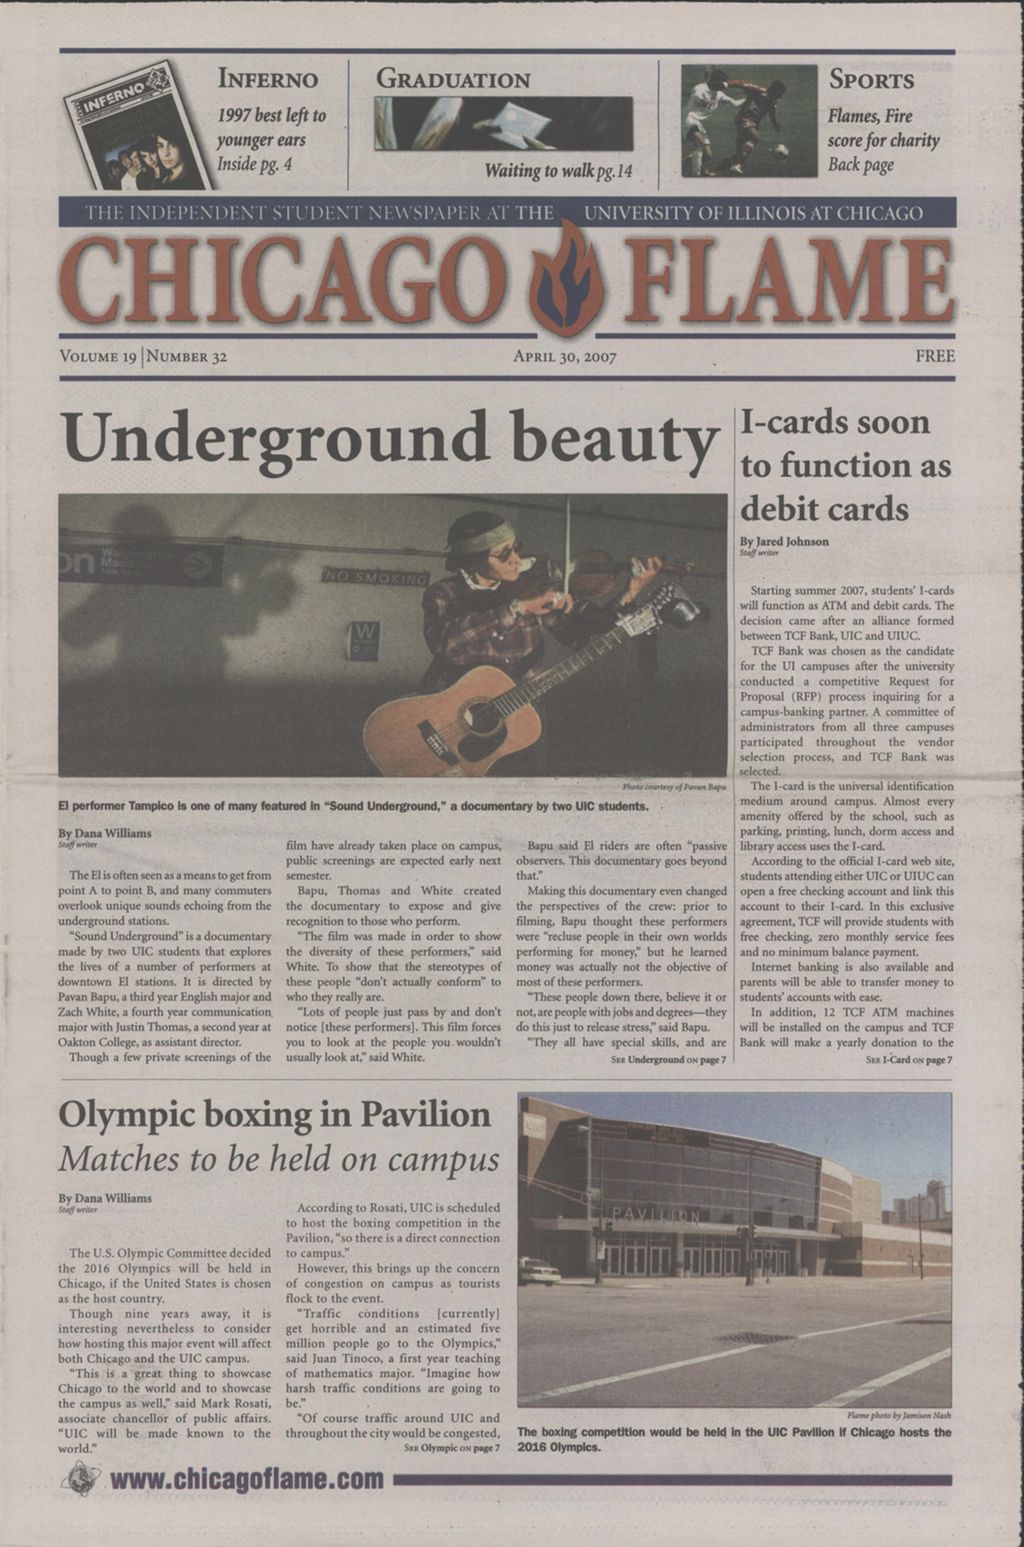 Miniature of Chicago Flame (April 30, 2007)